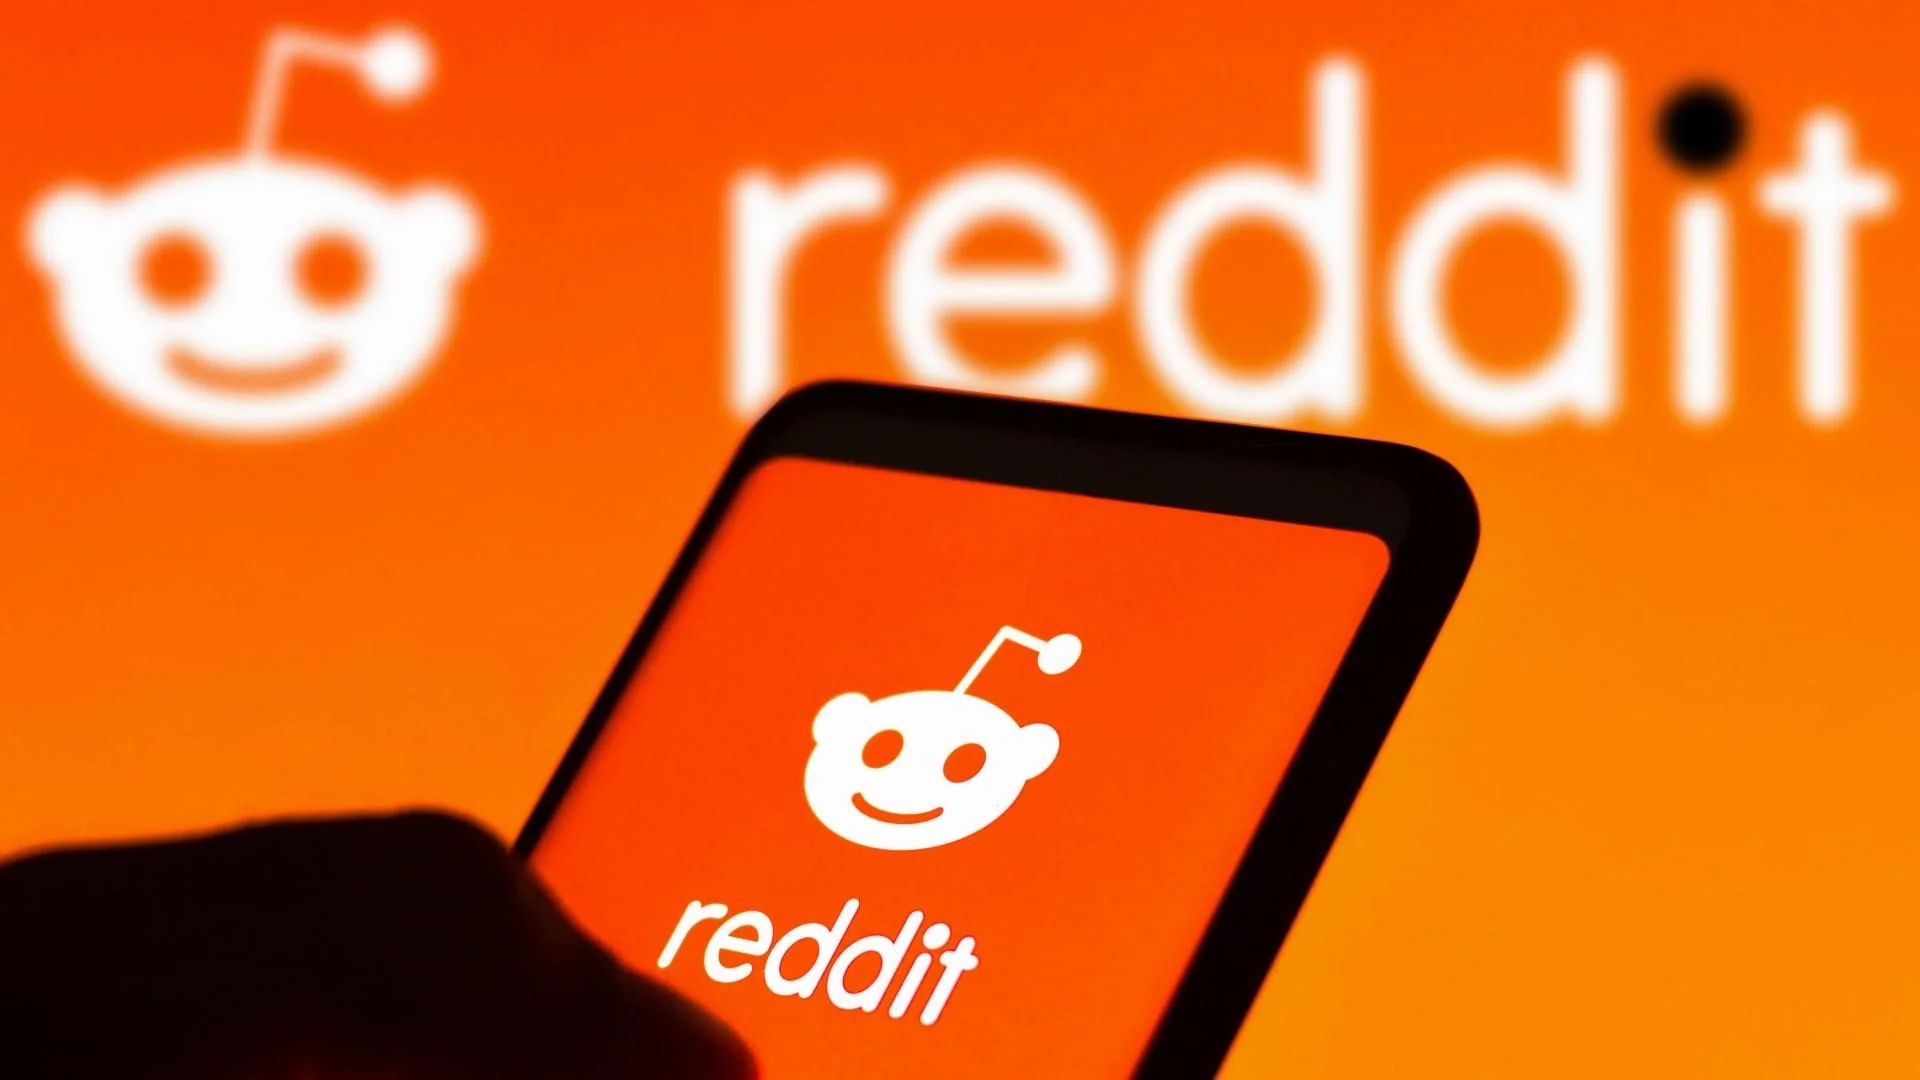 Is Reddit The Next Meme Stock? Users Wonder As Company Prepares For IPO